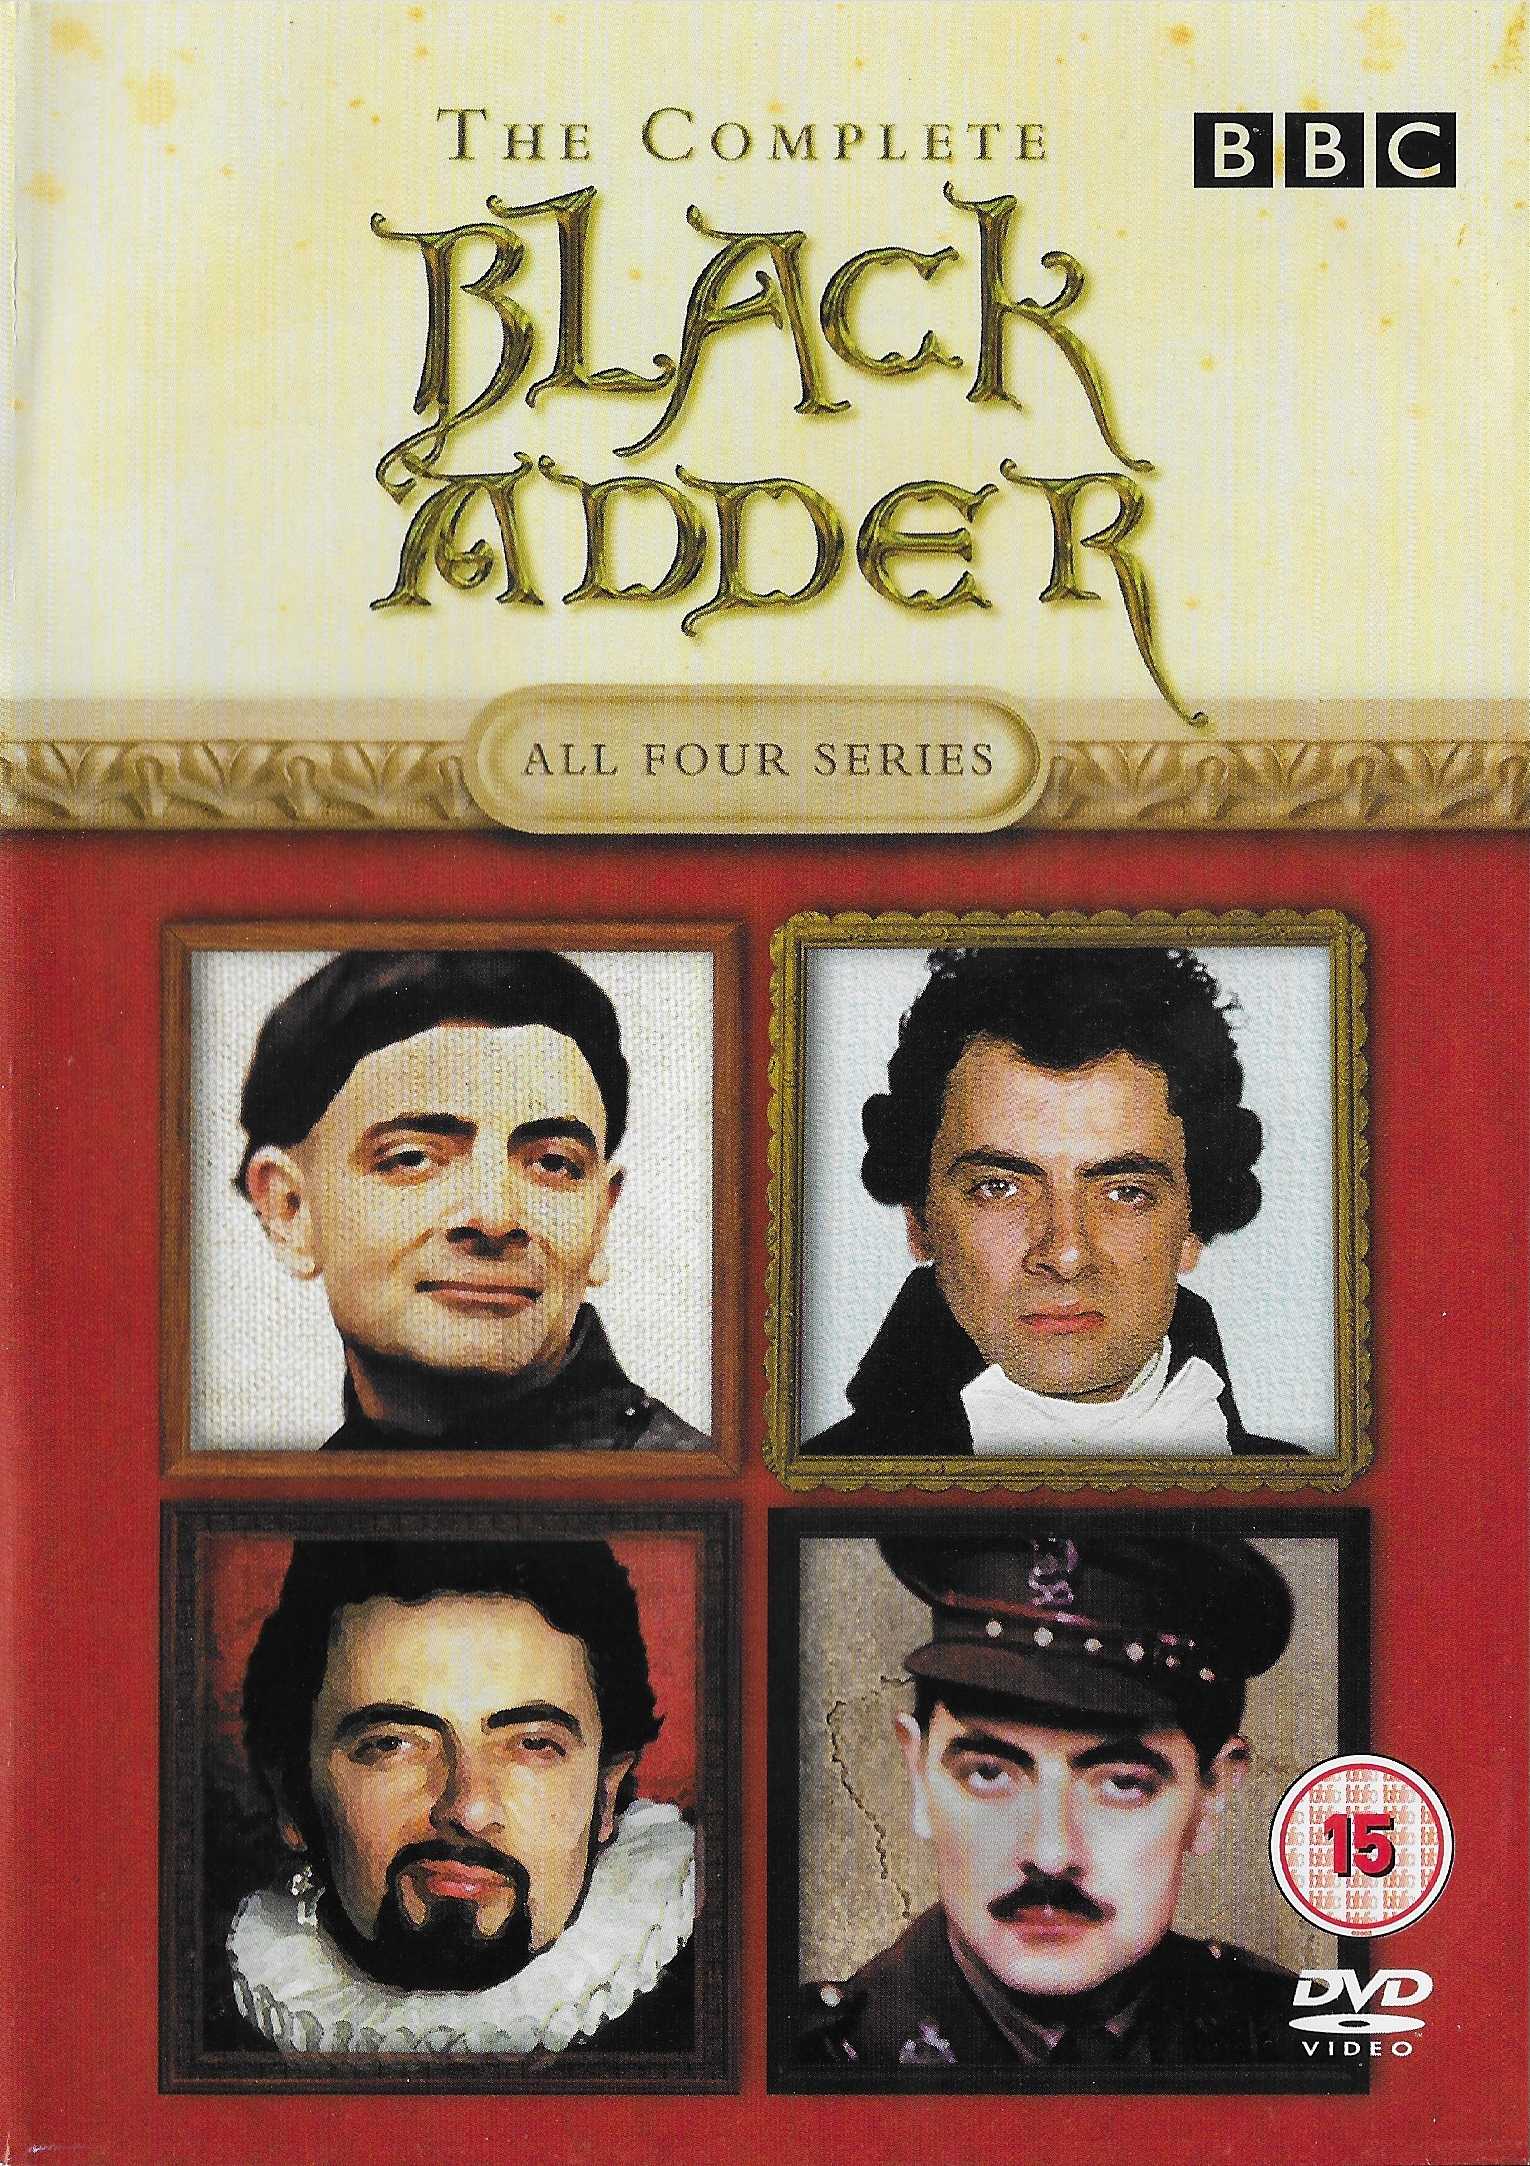 Picture of BBCDVD 1093 The complete Black Adder by artist Rowan Atkinson / Richard Curtis / Ben Elton from the BBC dvds - Records and Tapes library